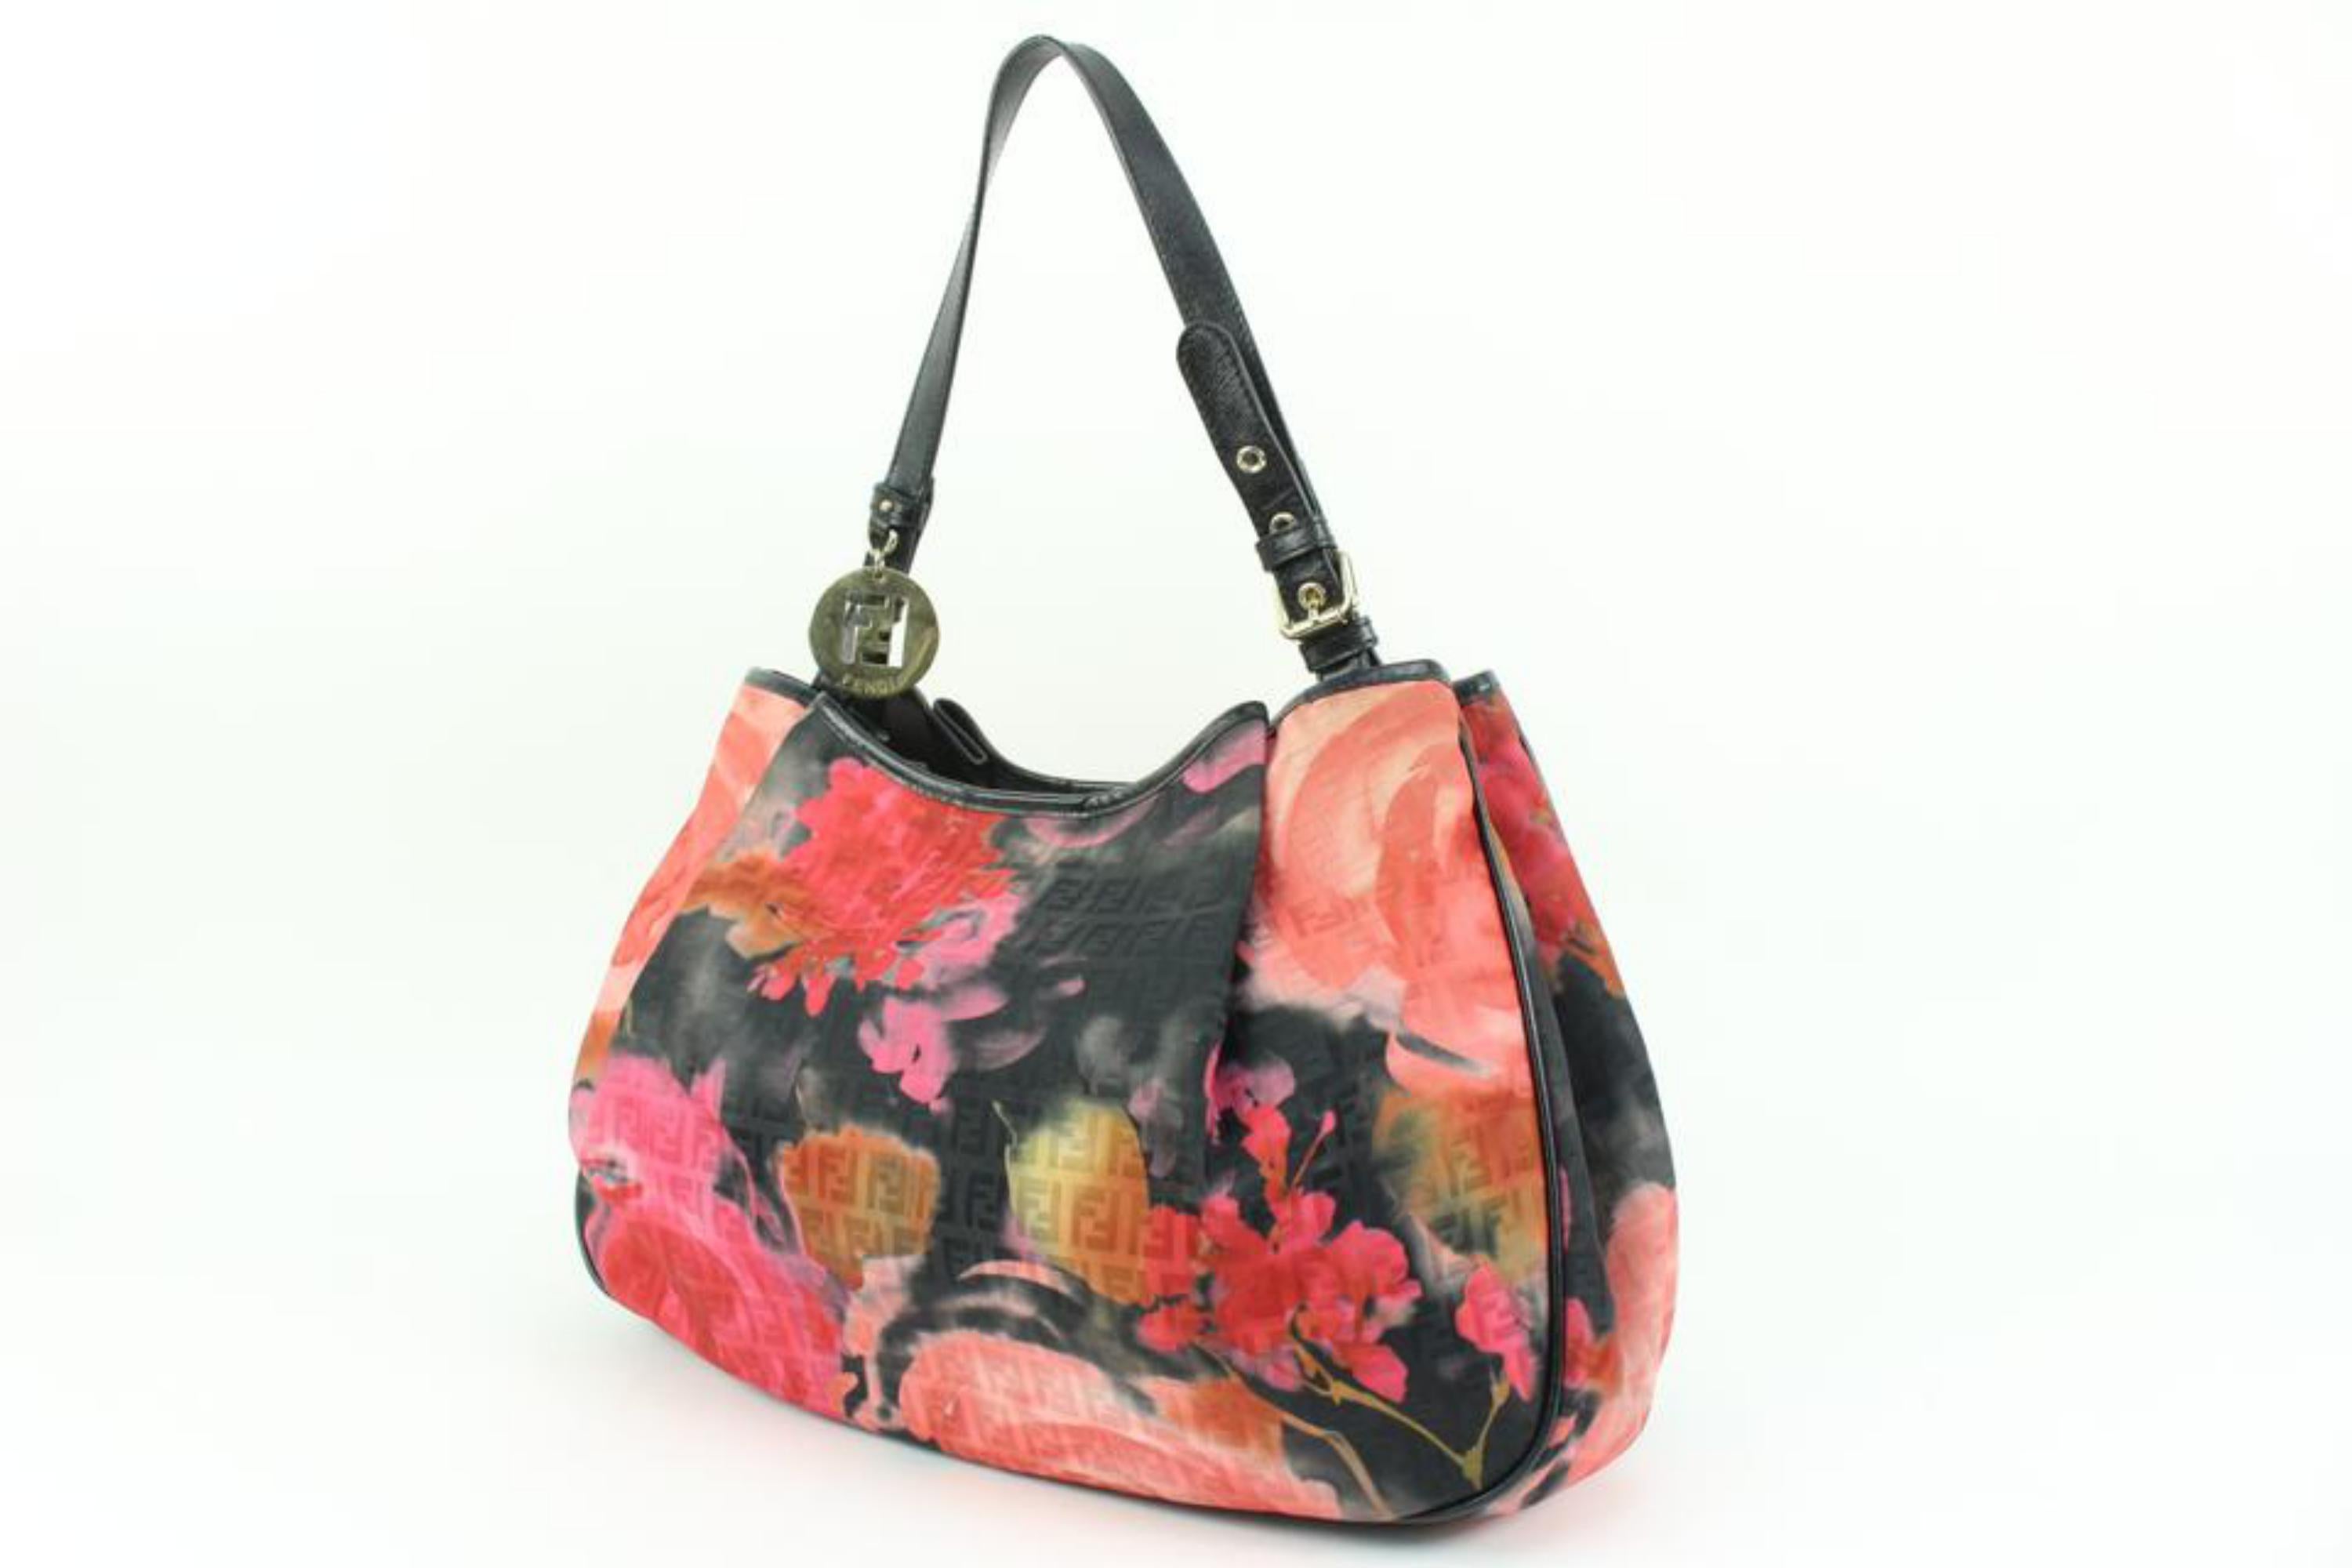 Fendi Black Monogram FF Zucchino Floral One Shoulder Hobo Bag 37f324s
Date Code/Serial Number: 
Made In: Italy
Measurements: Length:  17